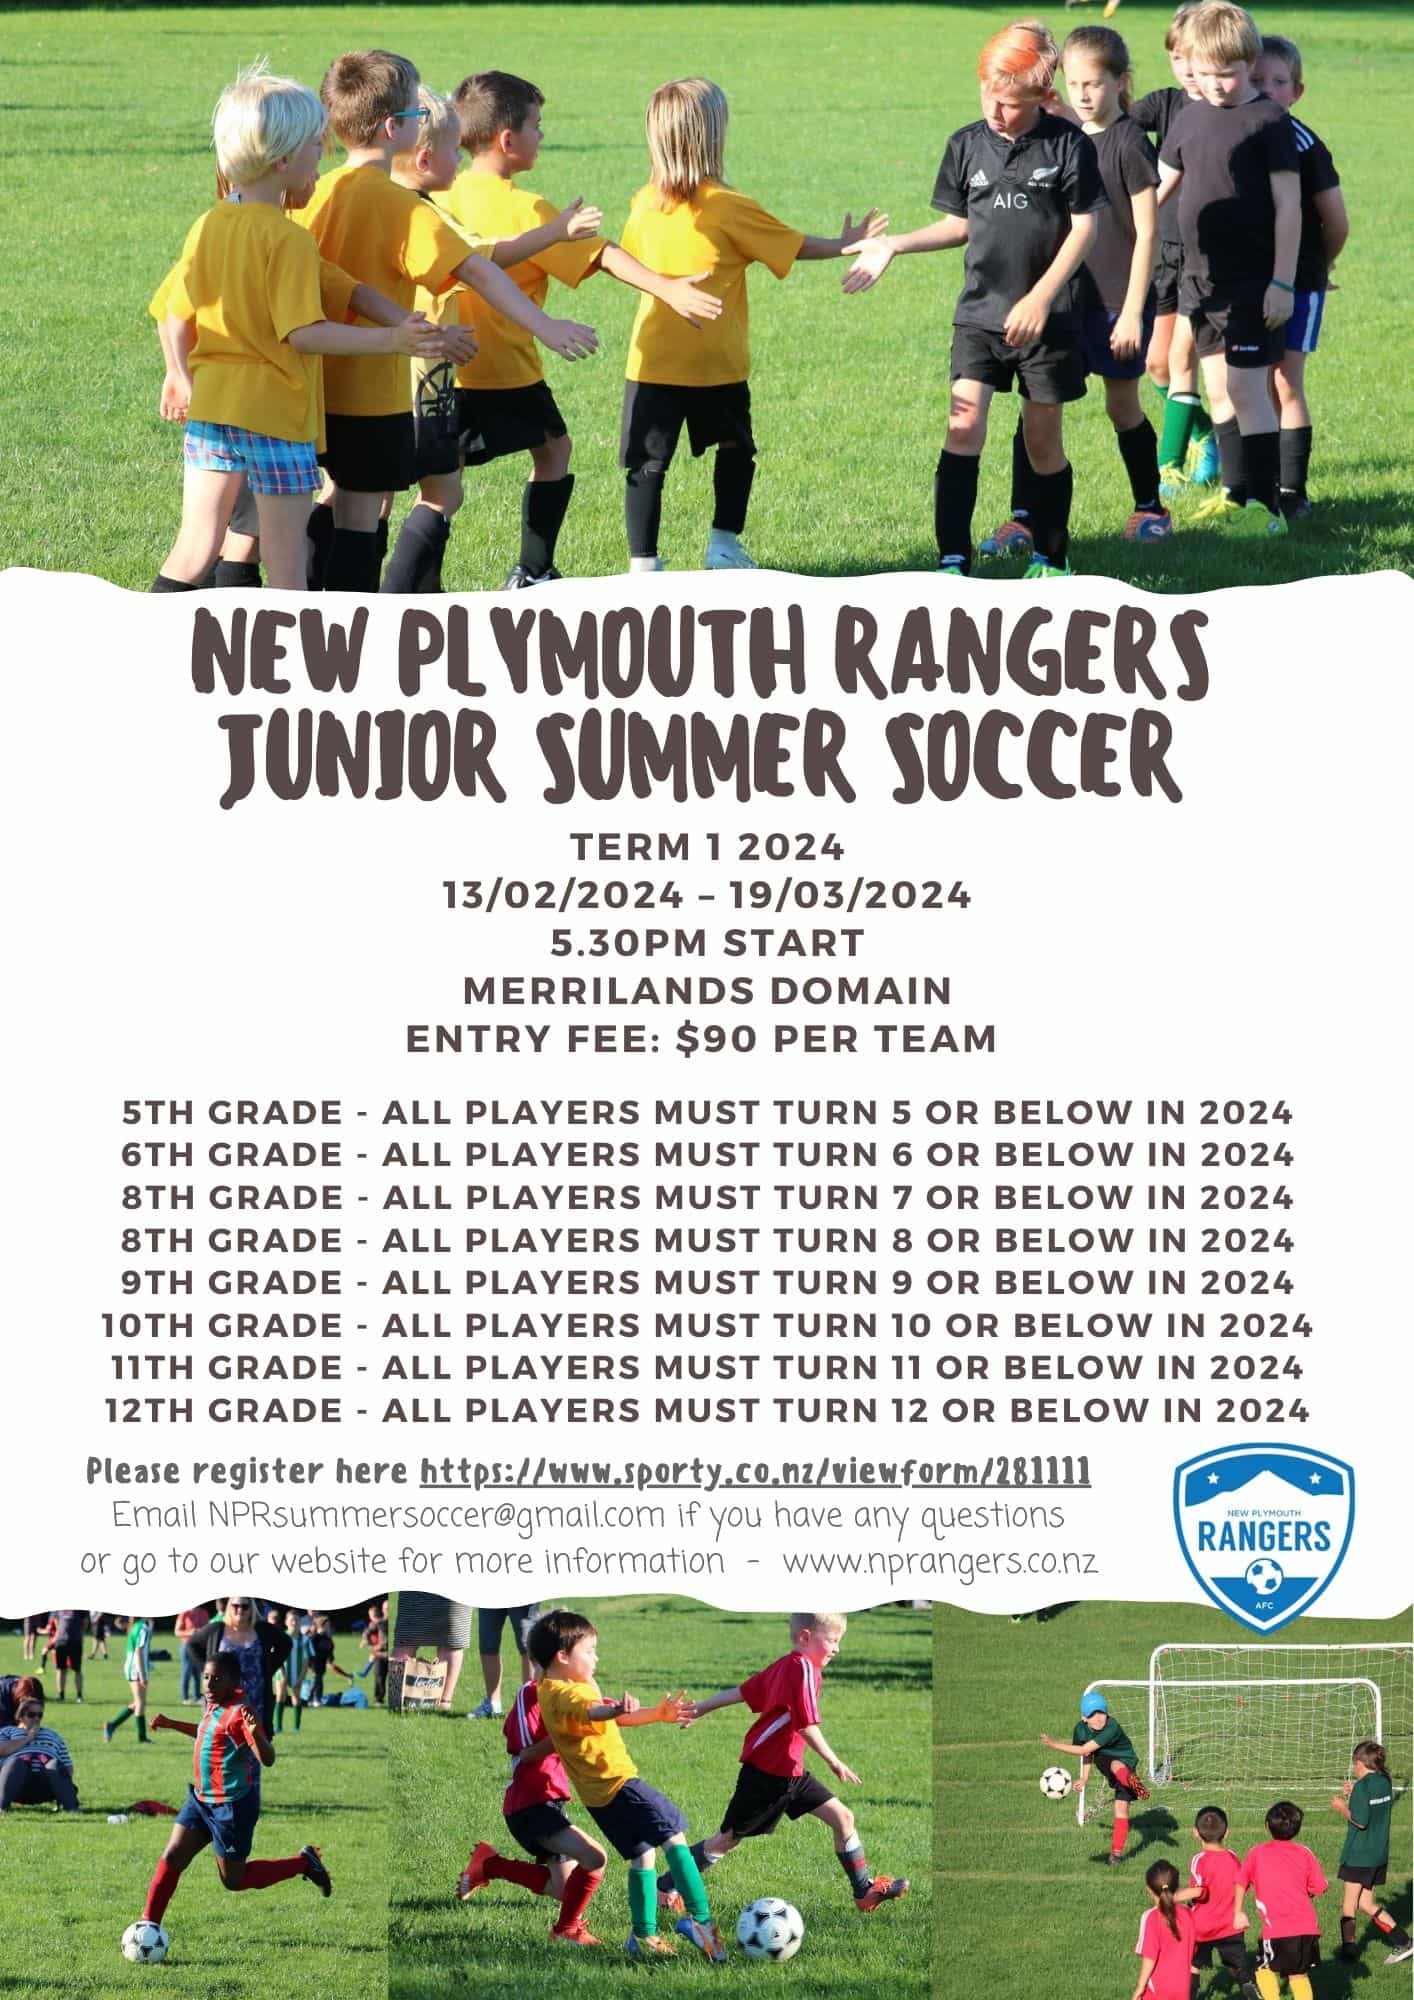 Copy of Please register through email NPRsummersoccer@gmail.com http://www.nprangers.co.nz Team Fees can be paid online. NP Rangers AFC, 15-3942-0001051-00 - 1